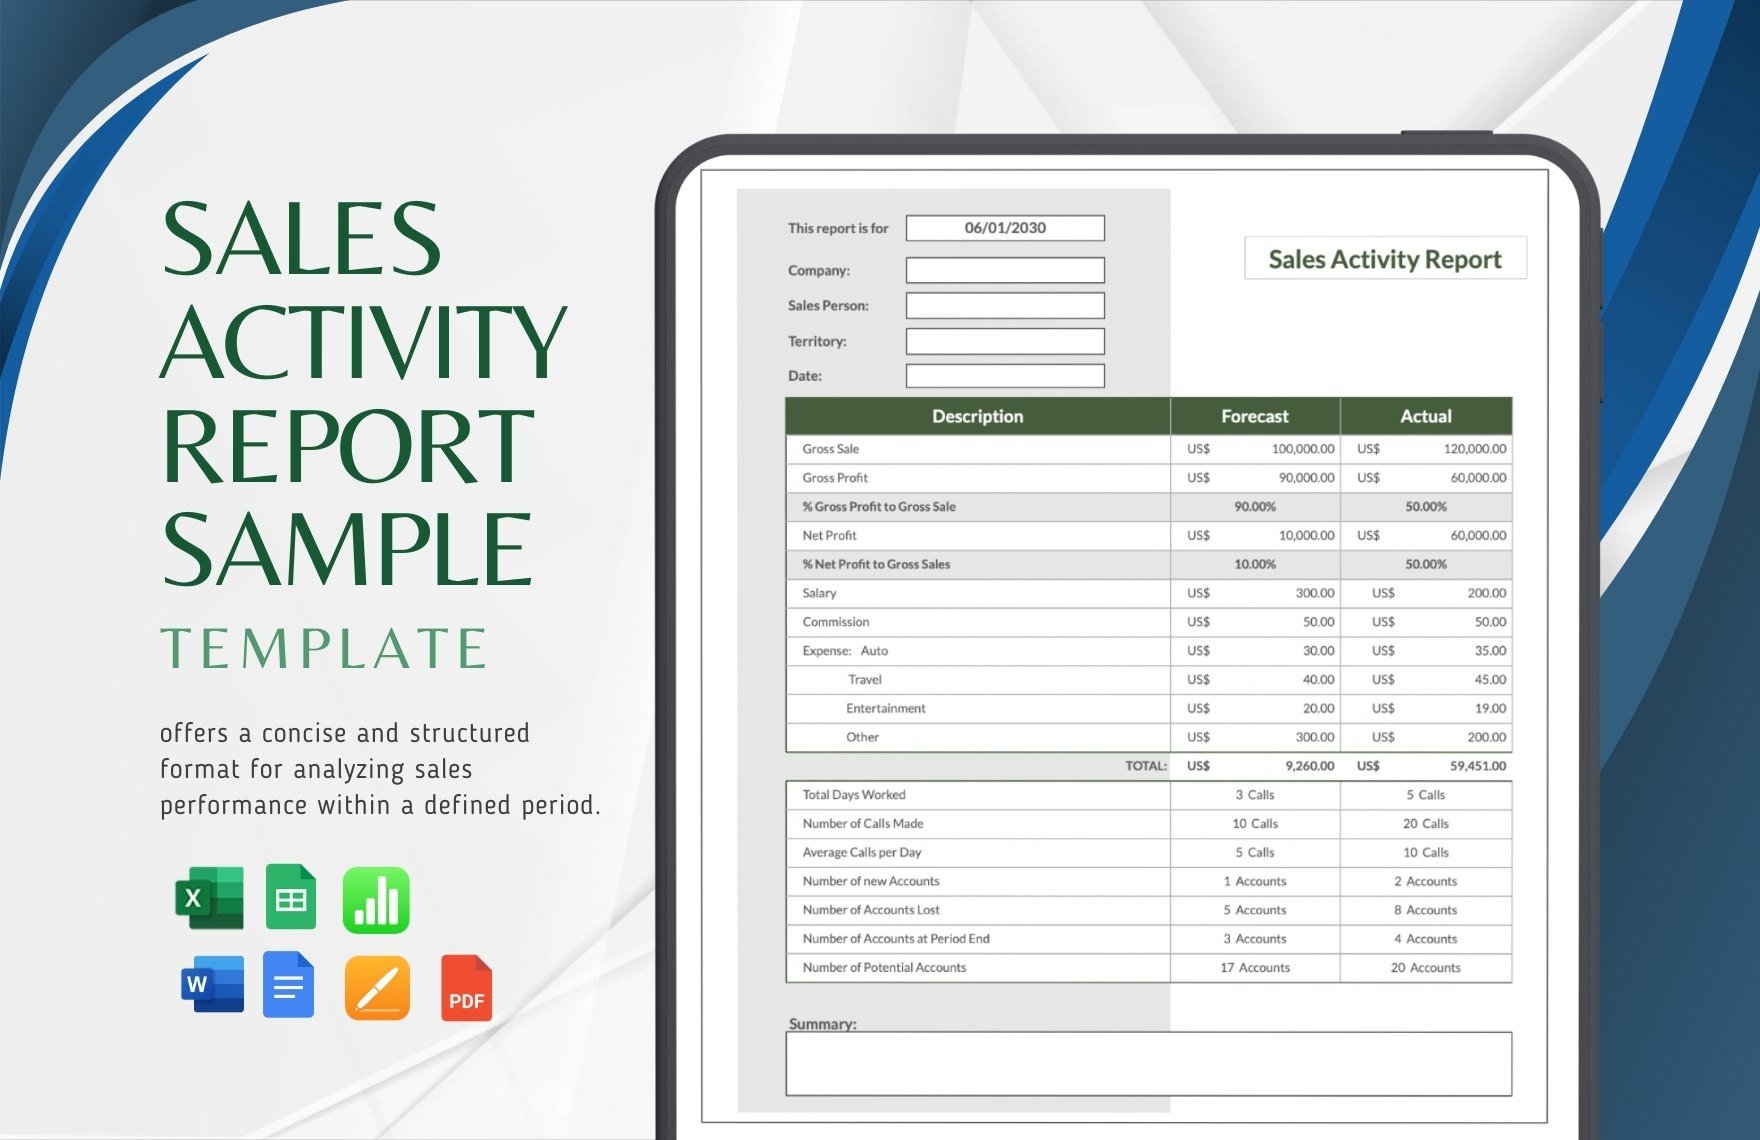 Sales Activity Report Sample Template in Word, Google Docs, Excel, PDF, Google Sheets, Apple Pages, Apple Numbers